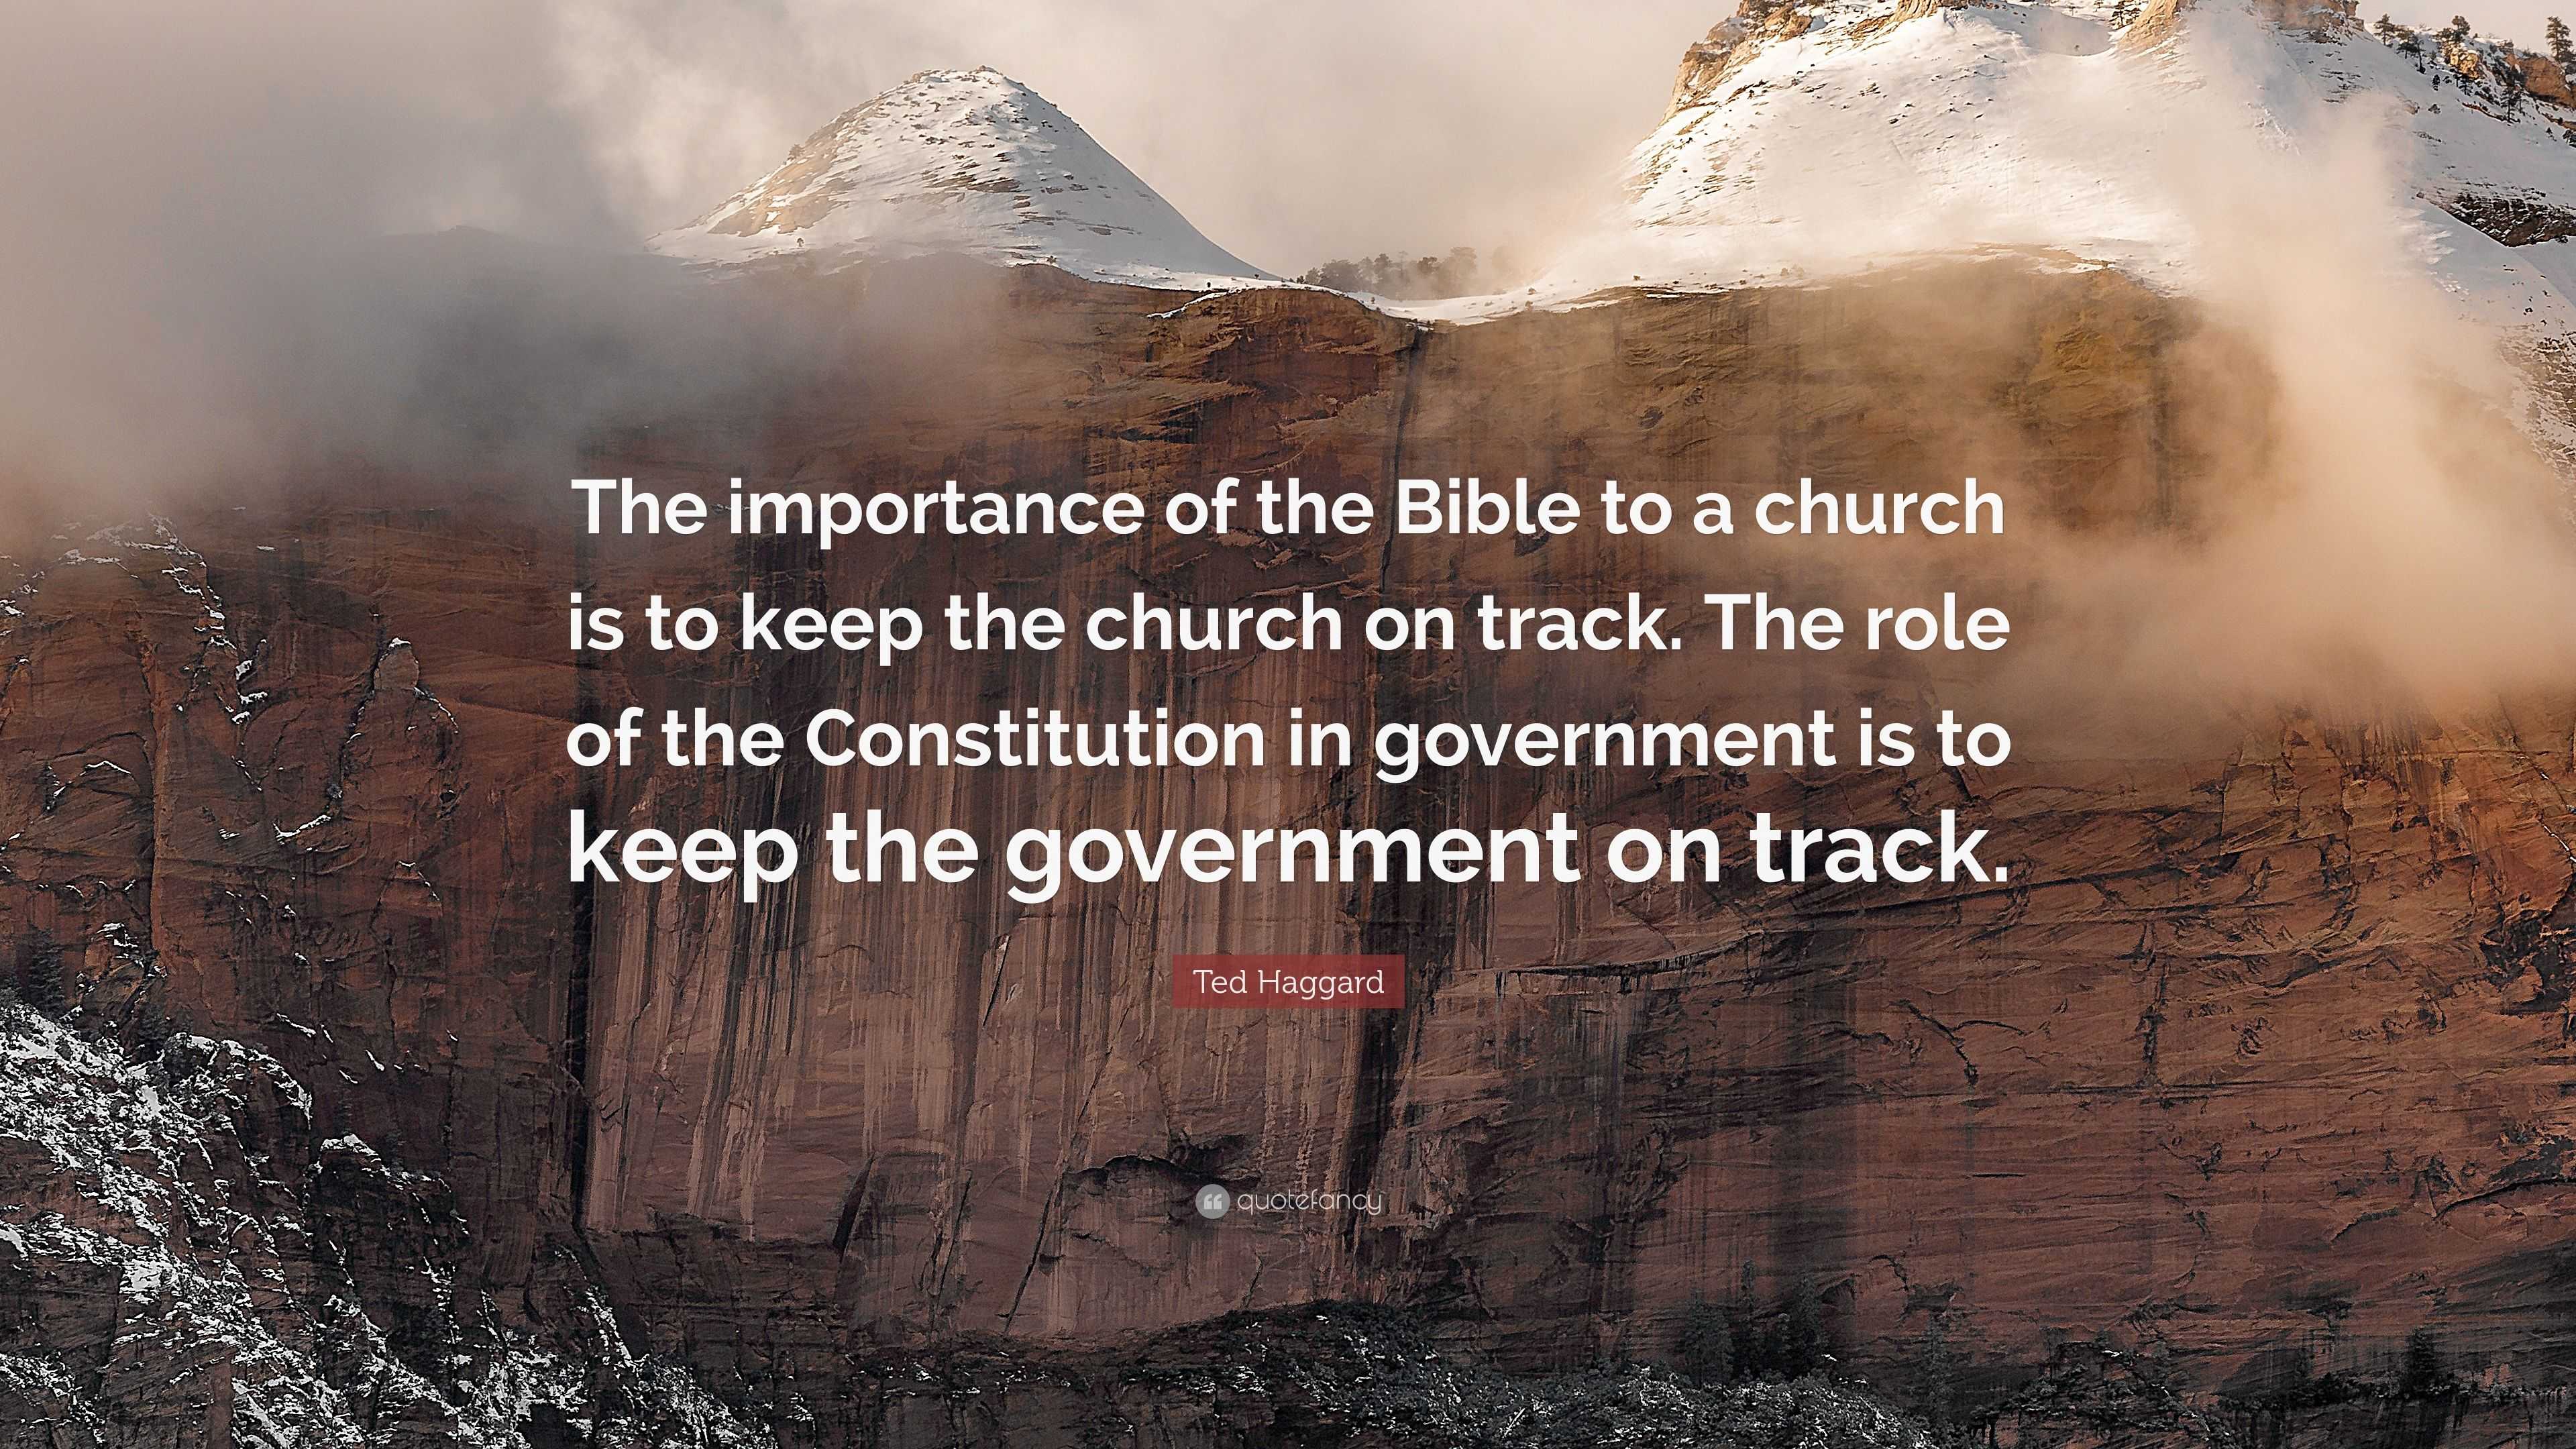 Ted Haggard Quote “The importance of the Bible to a